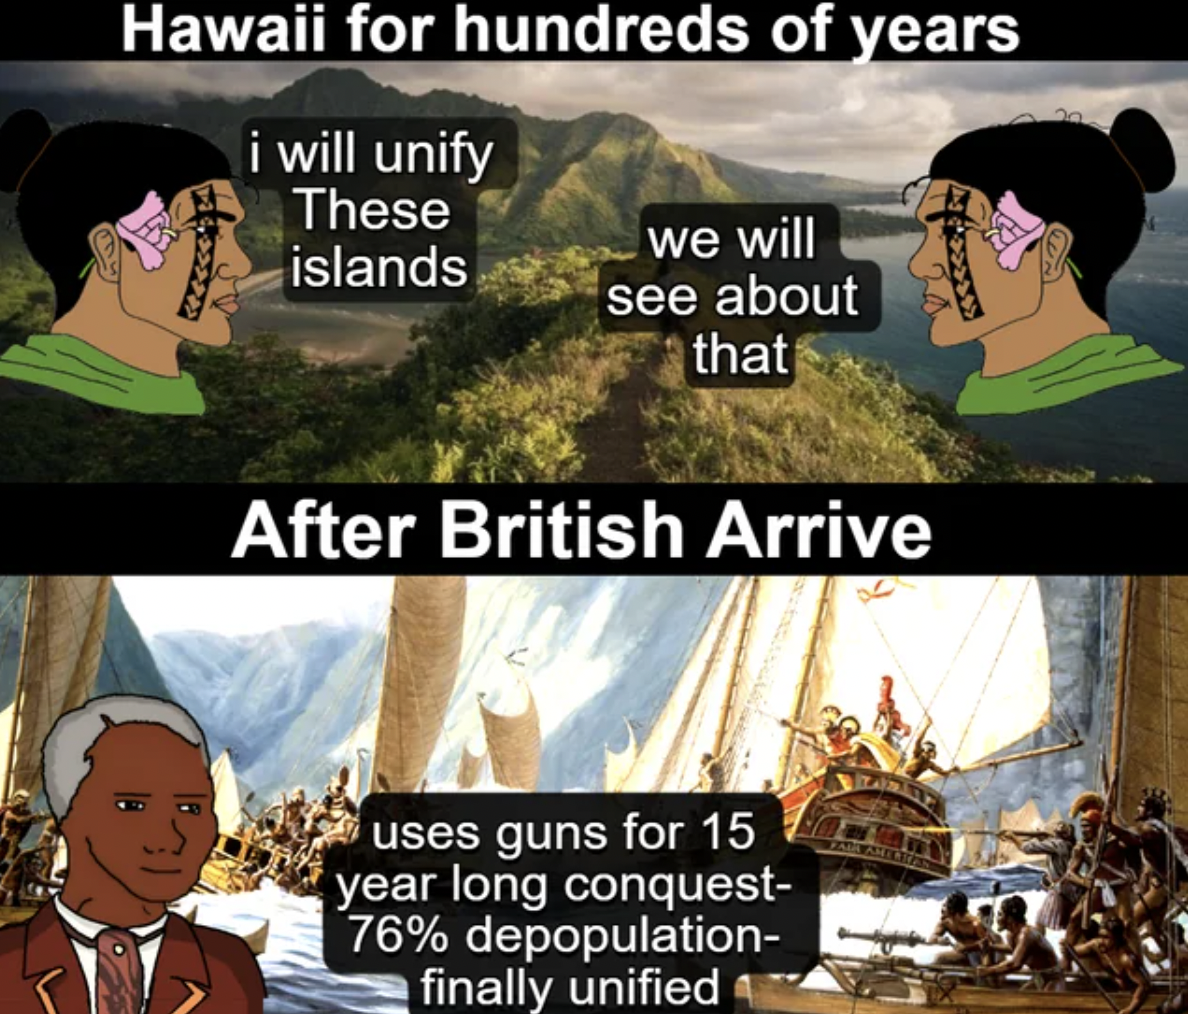 cartoon - Hawaii for hundreds of years i will unify These islands we will see about that After British Arrive uses guns for 15 year long conquest 76% depopulation finally unified